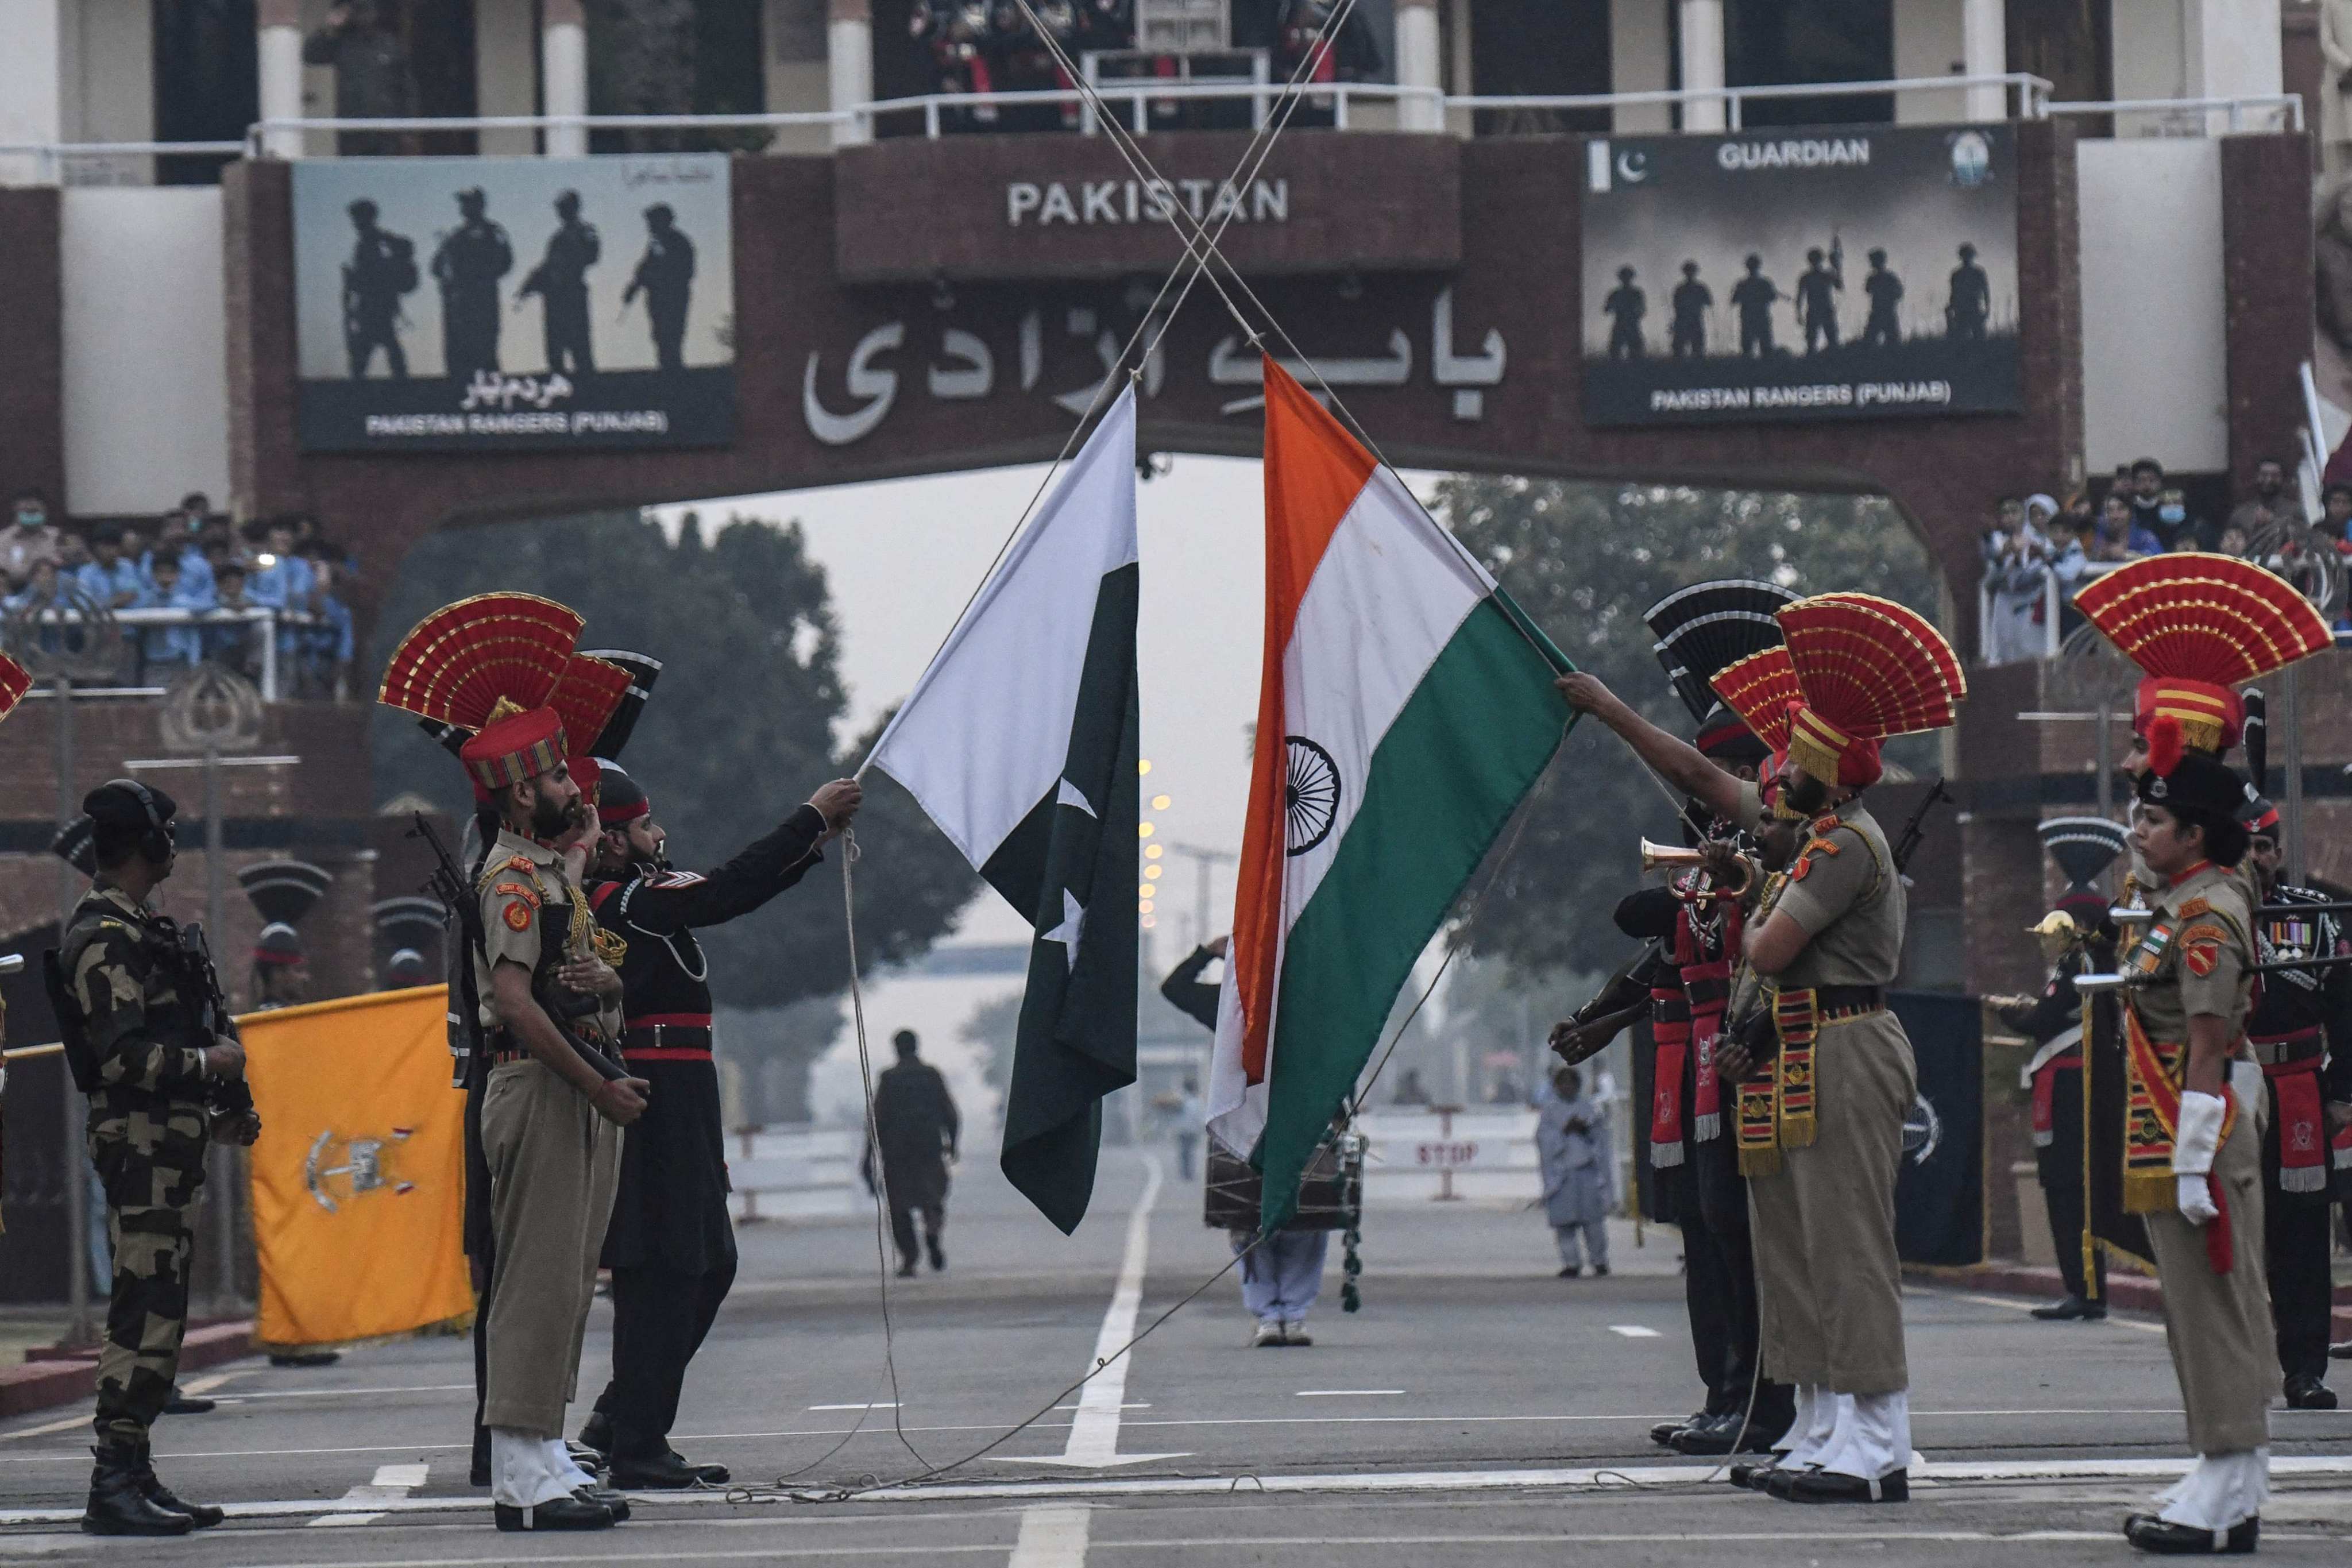 Indian and Pakistani border forces lower their respective flags at a daily ceremony held at the India-Pakistan Wagah Border Post. Photo: AFP